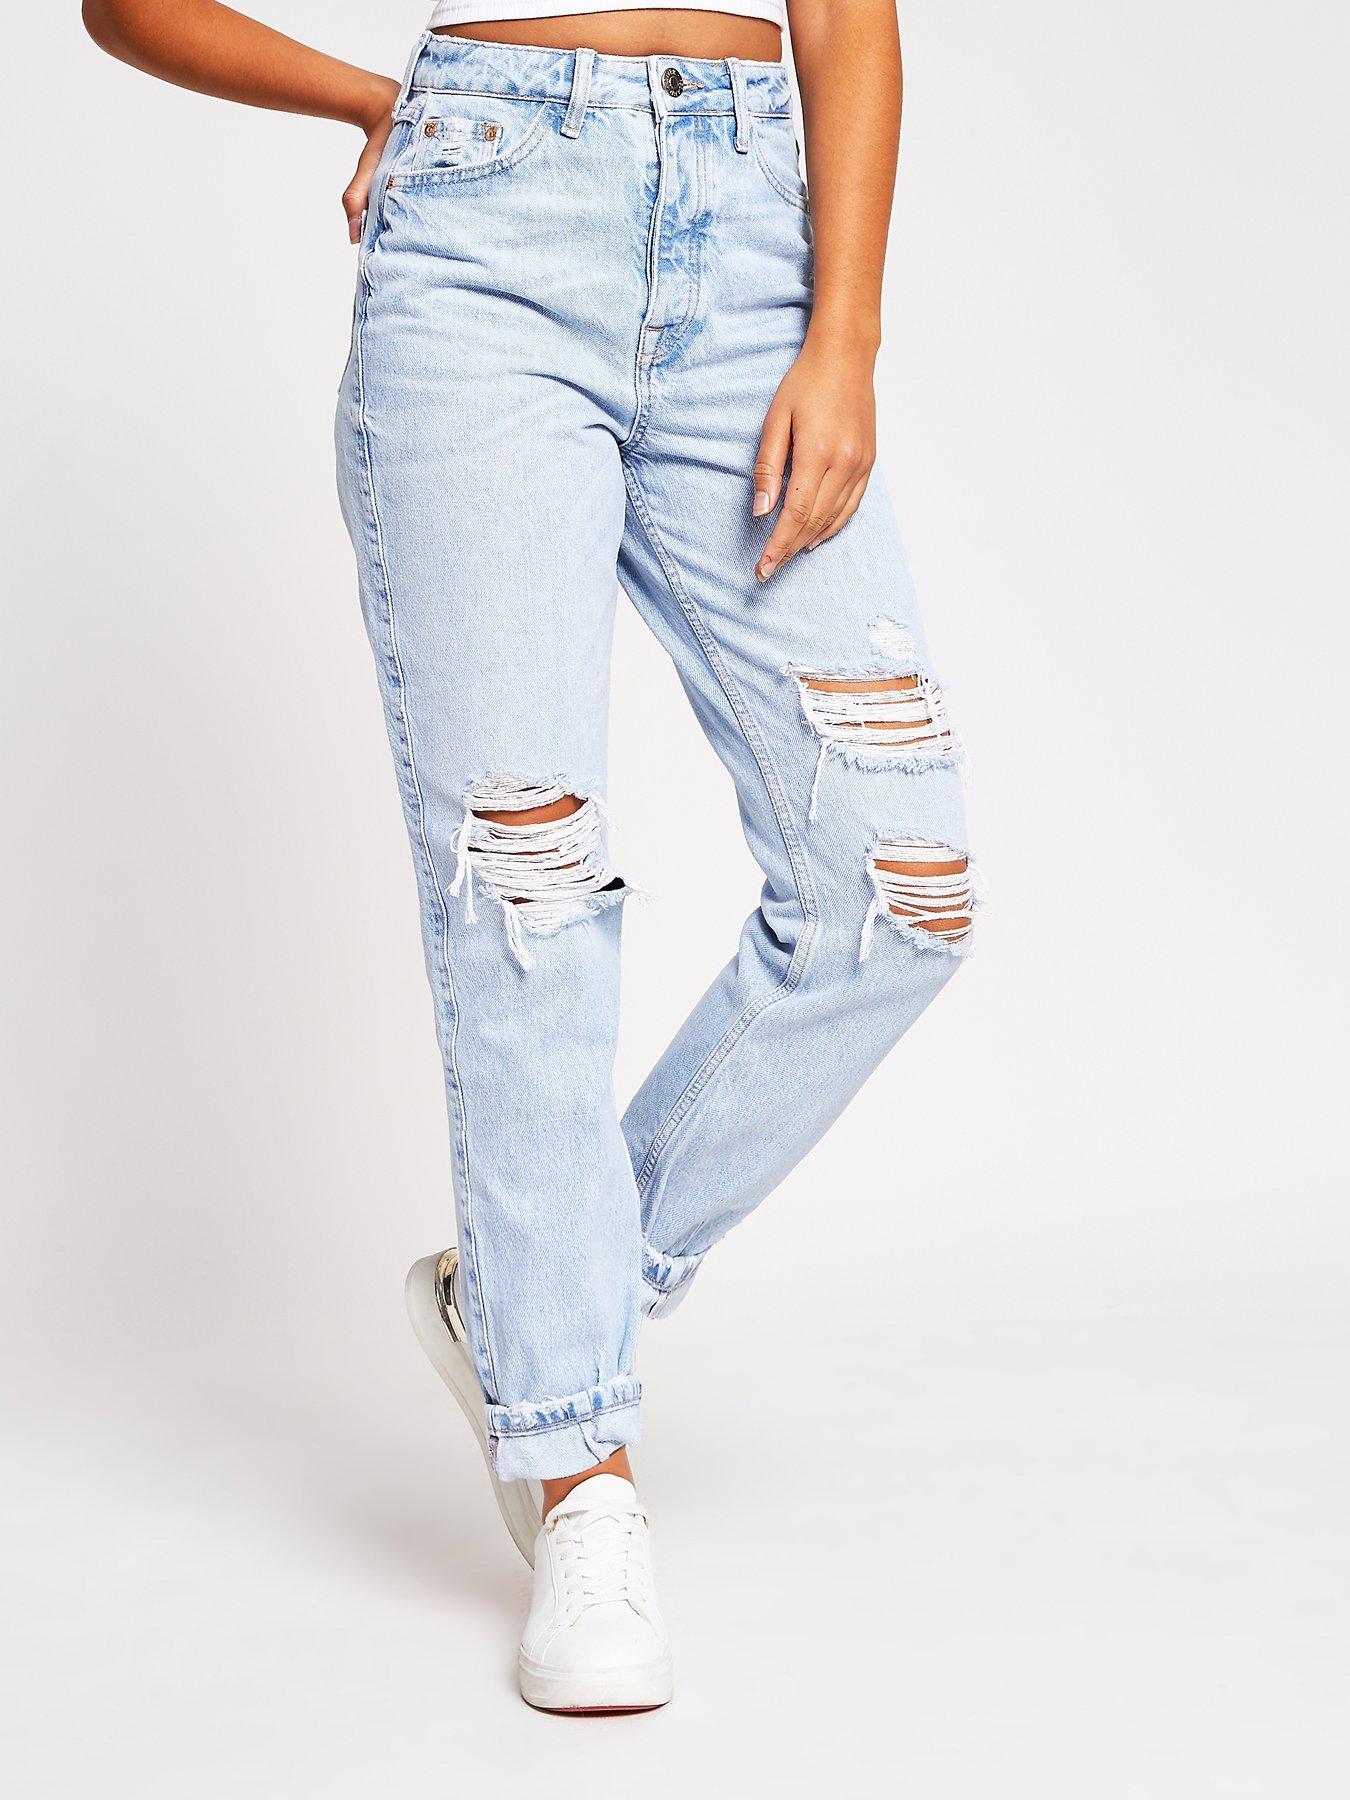 river island distressed jeans